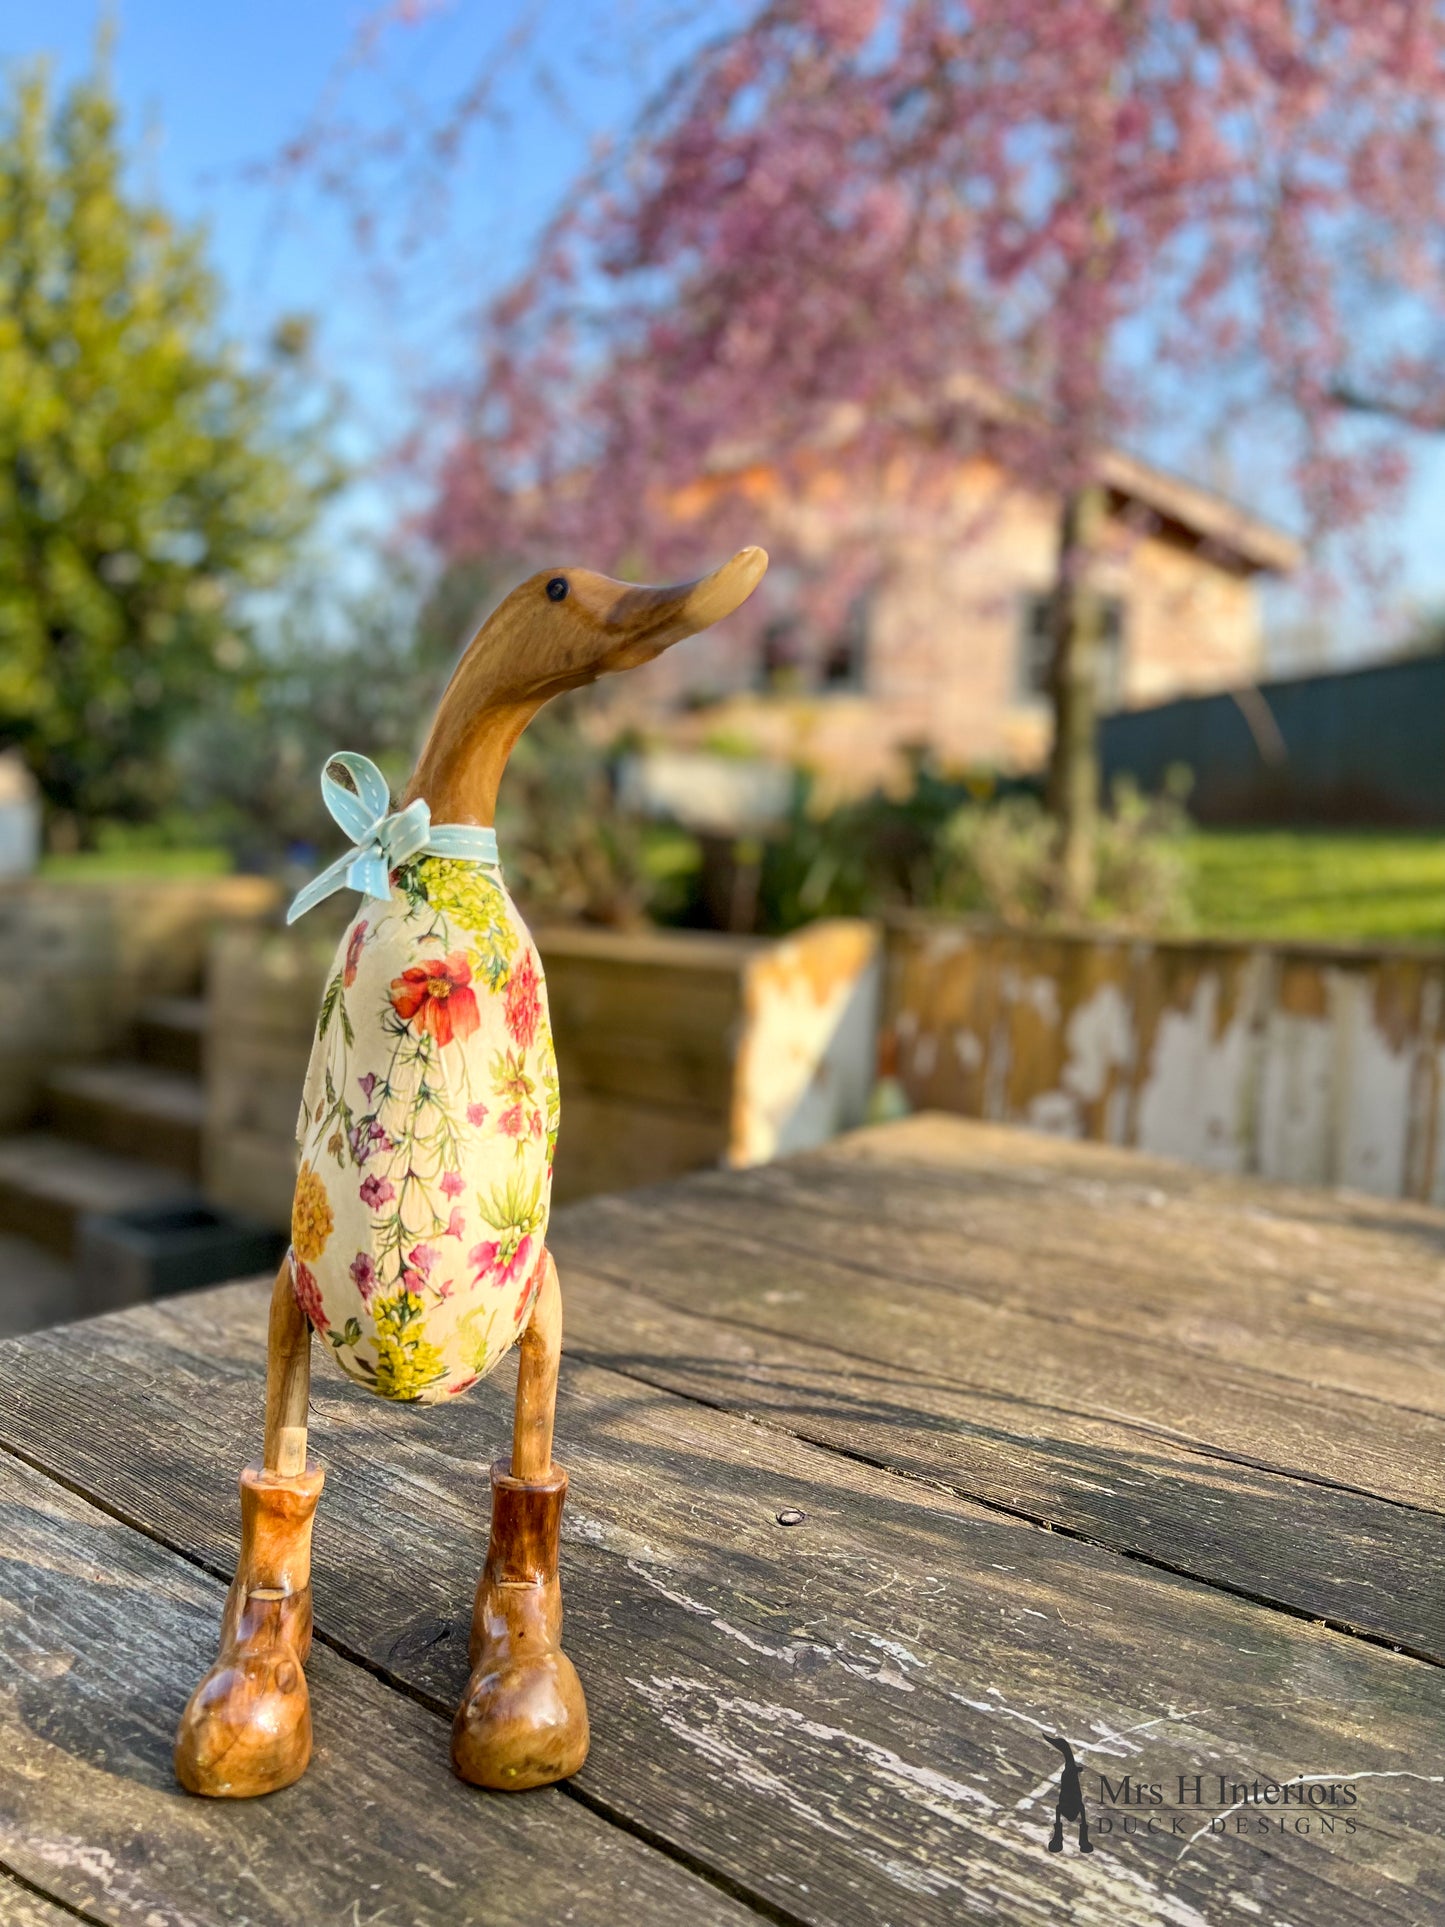 Ella The Floral Duck - Decorated Wooden Duck in Boots by Mrs H the Duck Lady